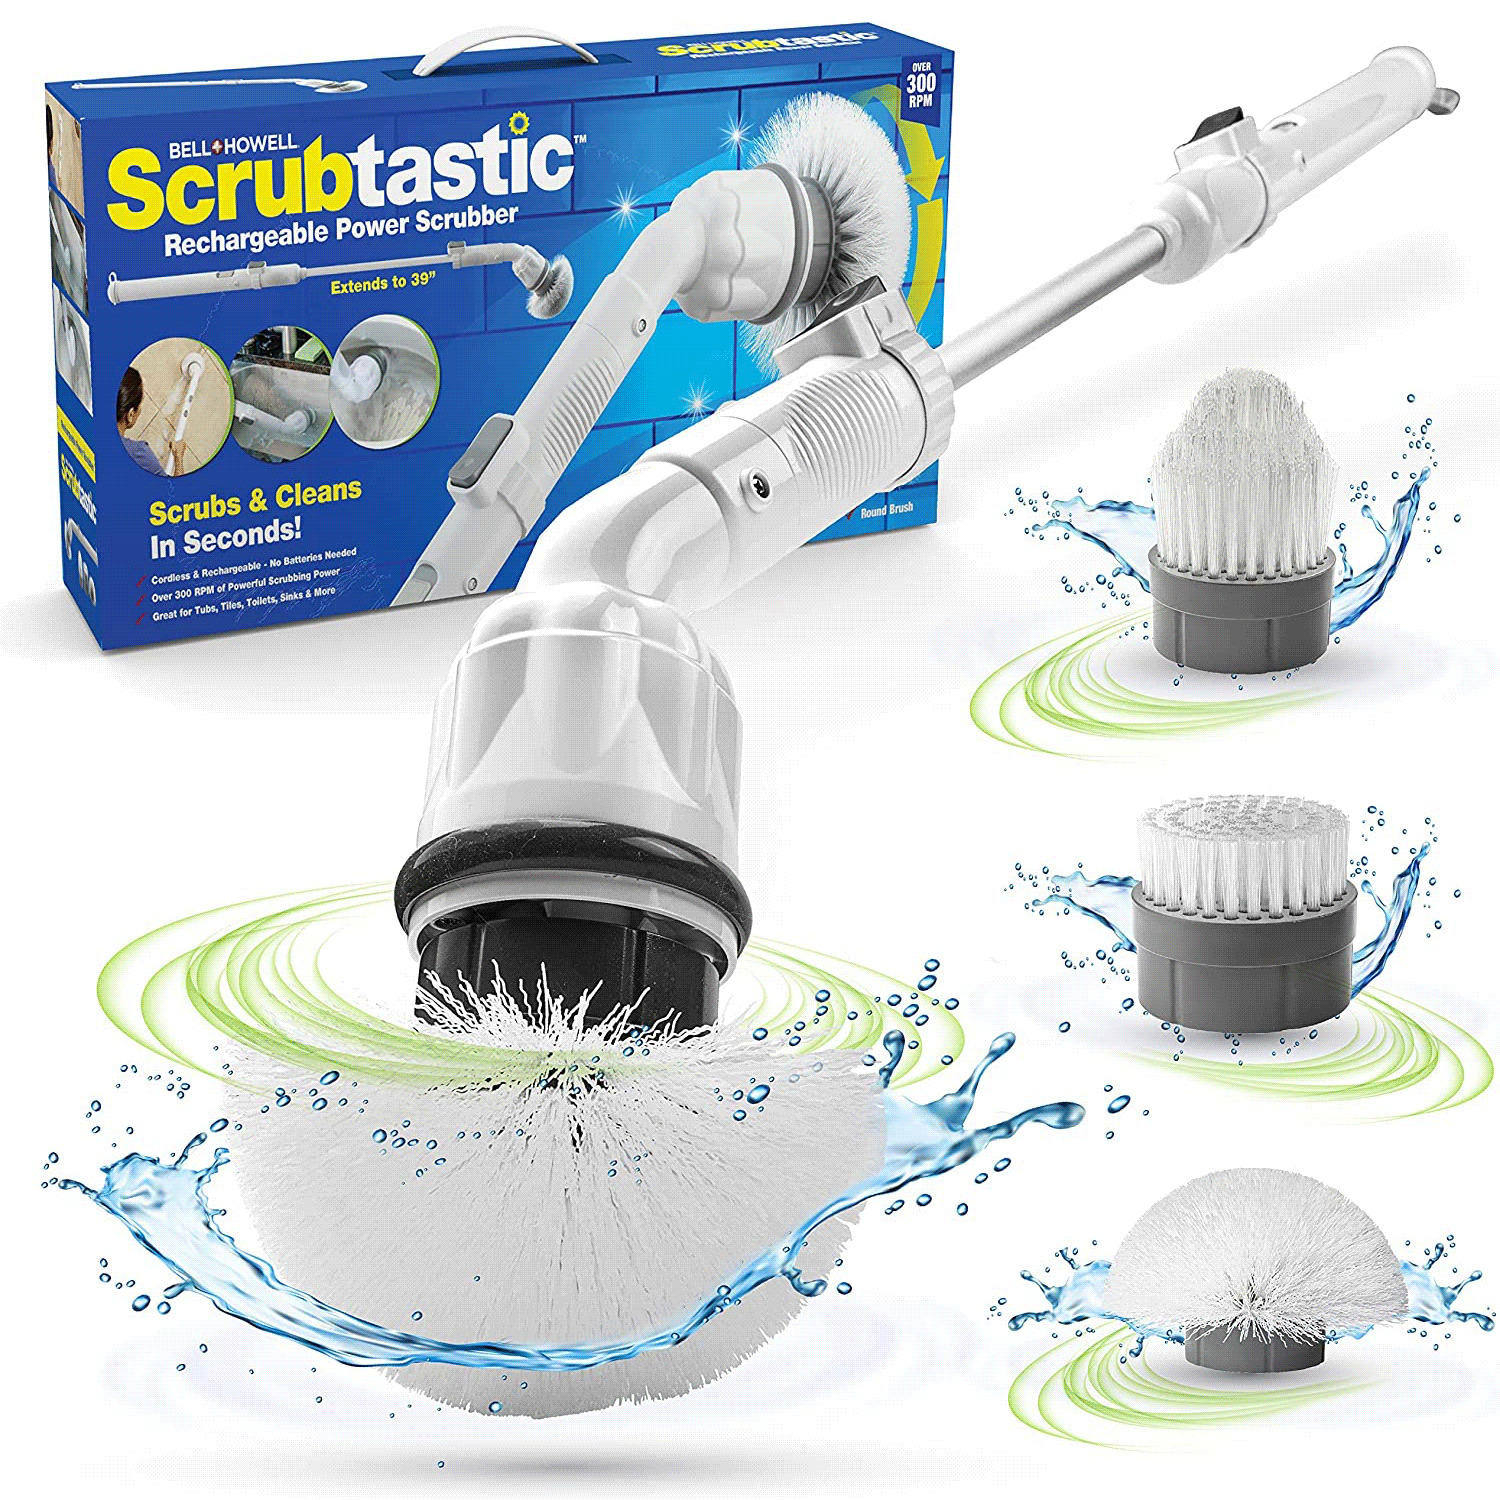 Bell+Howell - Scrubtastic, multi-purpose electric spin brush scrubber with 3 brush heads